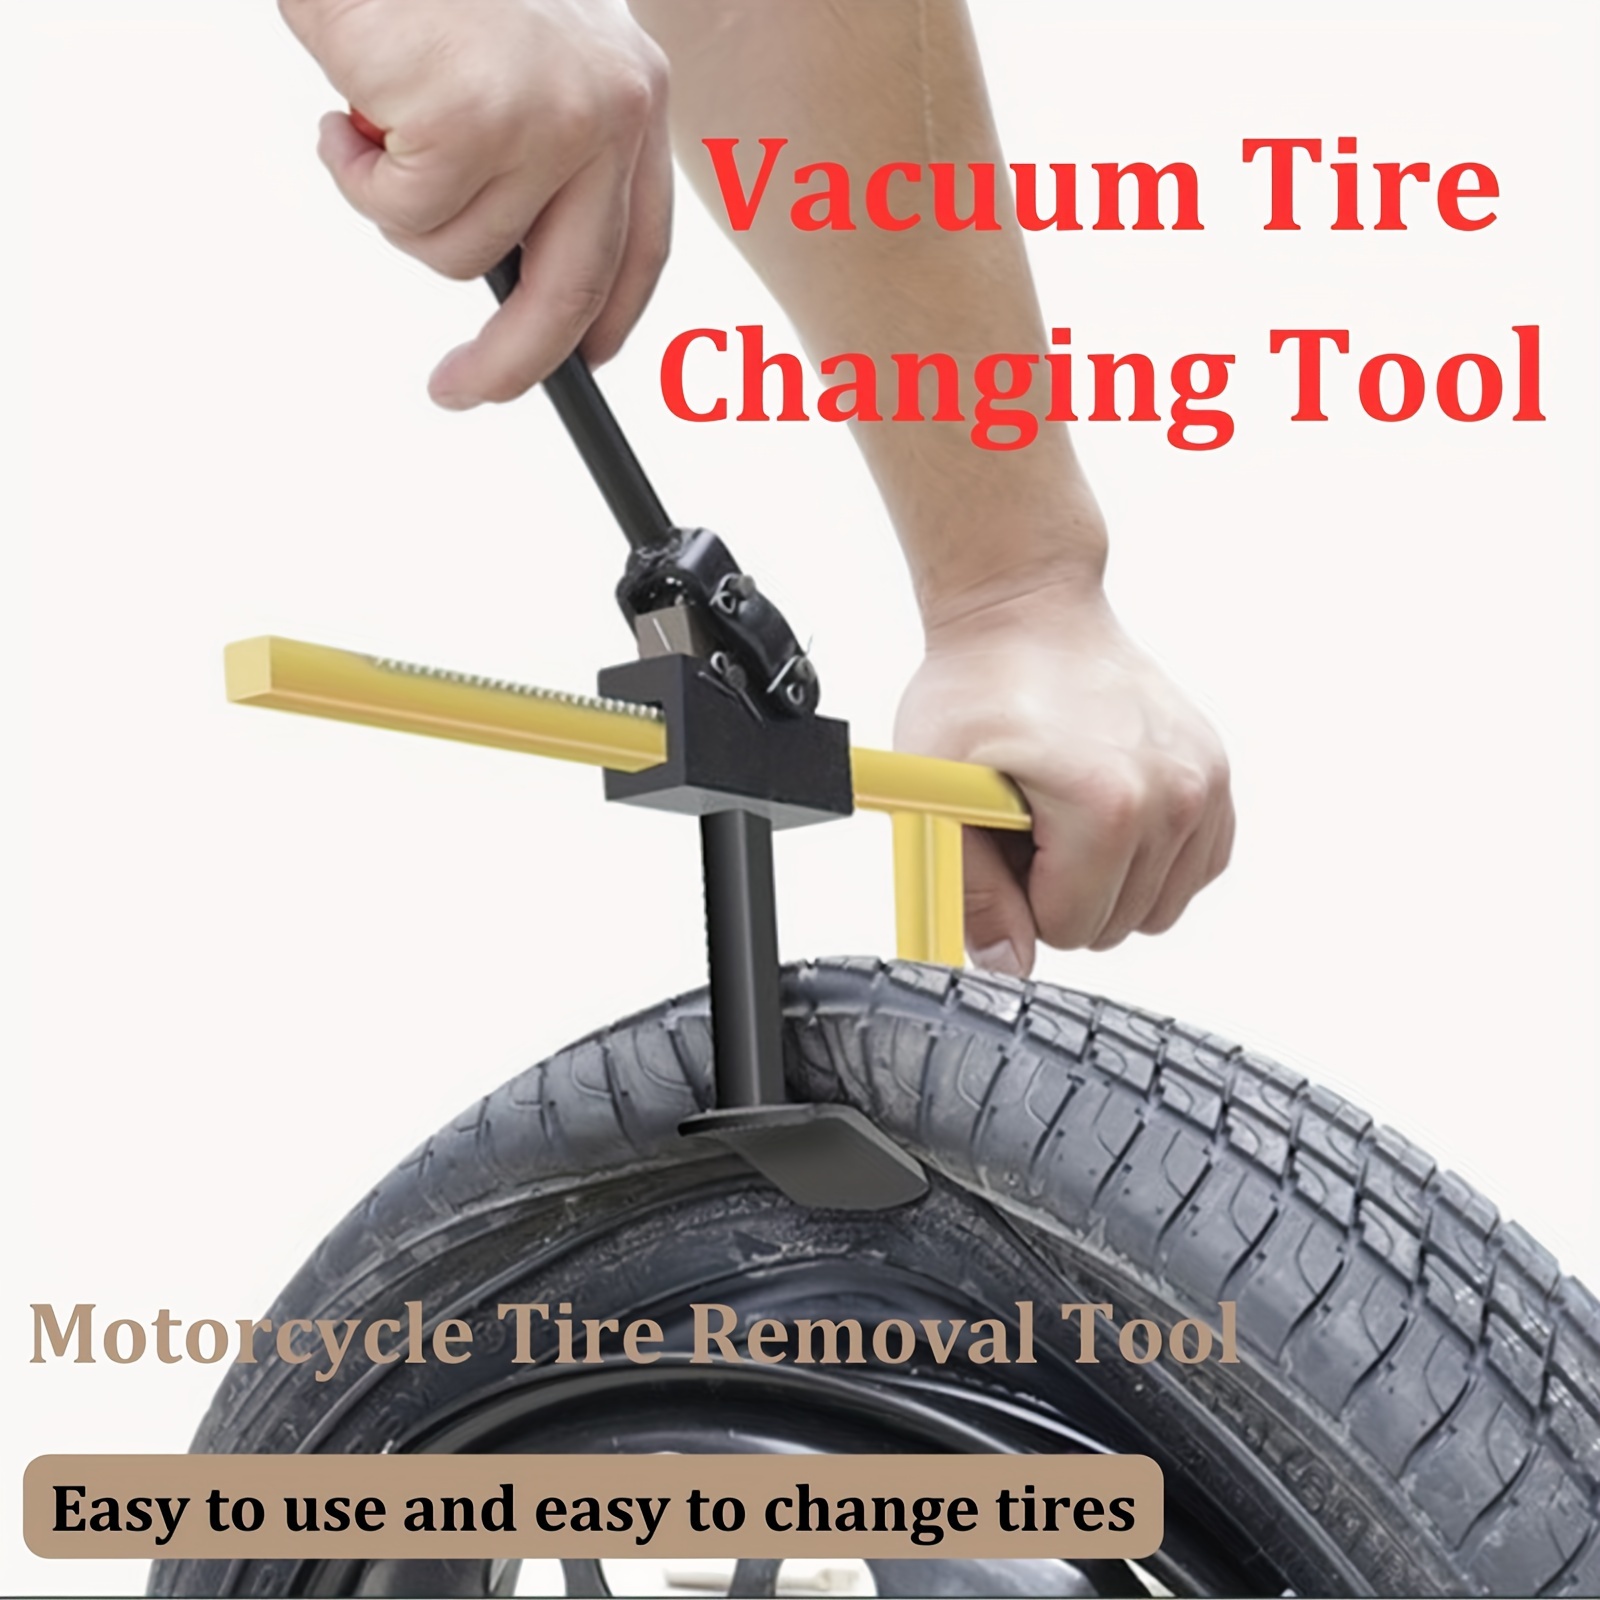 

Easy-grip Motorcycle & Car Tire Changing Tool - Vacuum Removal, Metal Clamp Press With Smooth Gear Operation